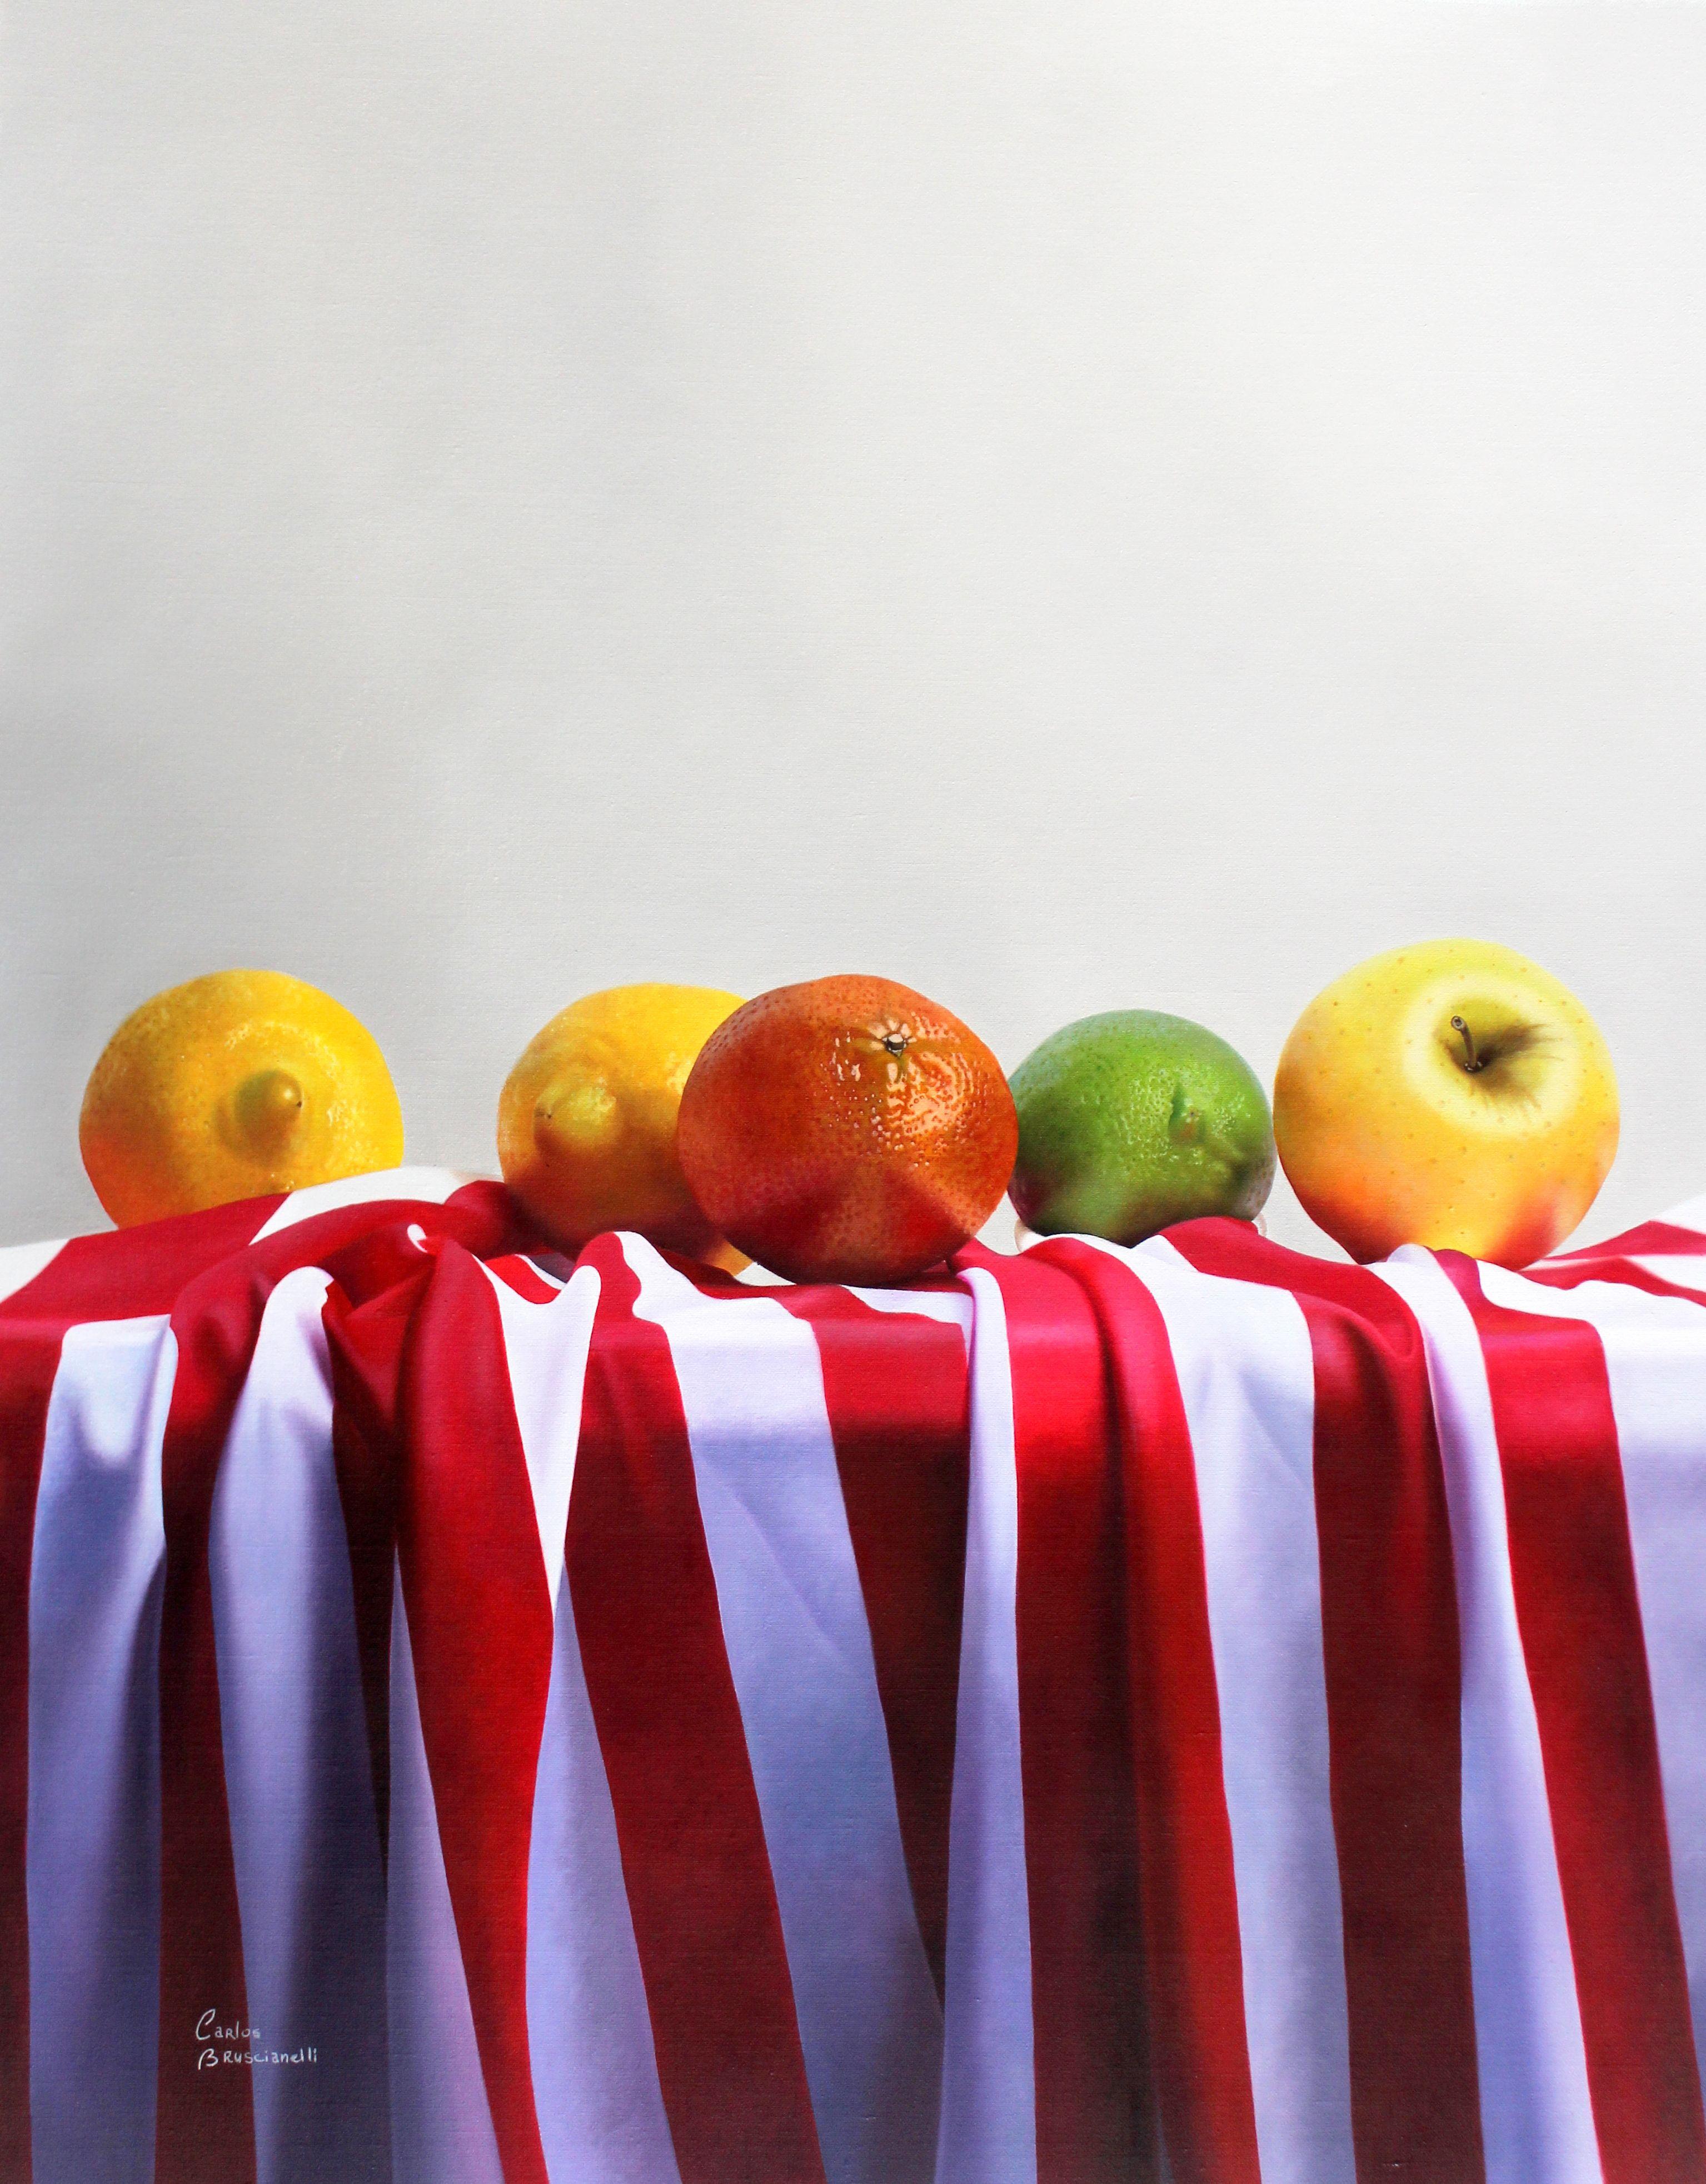 "Stripes & Fruits" by Carlos Bruscianelli, a Venezuelan realist painter based in Miami Beach, FL. Oil Painting on Oil Primed Linen - fine texture (Claessenses). 2021.    THE ARTWORK WILL BE SHIPPED ROLLED UP IN A TUBE. :: Painting :: Photorealism ::